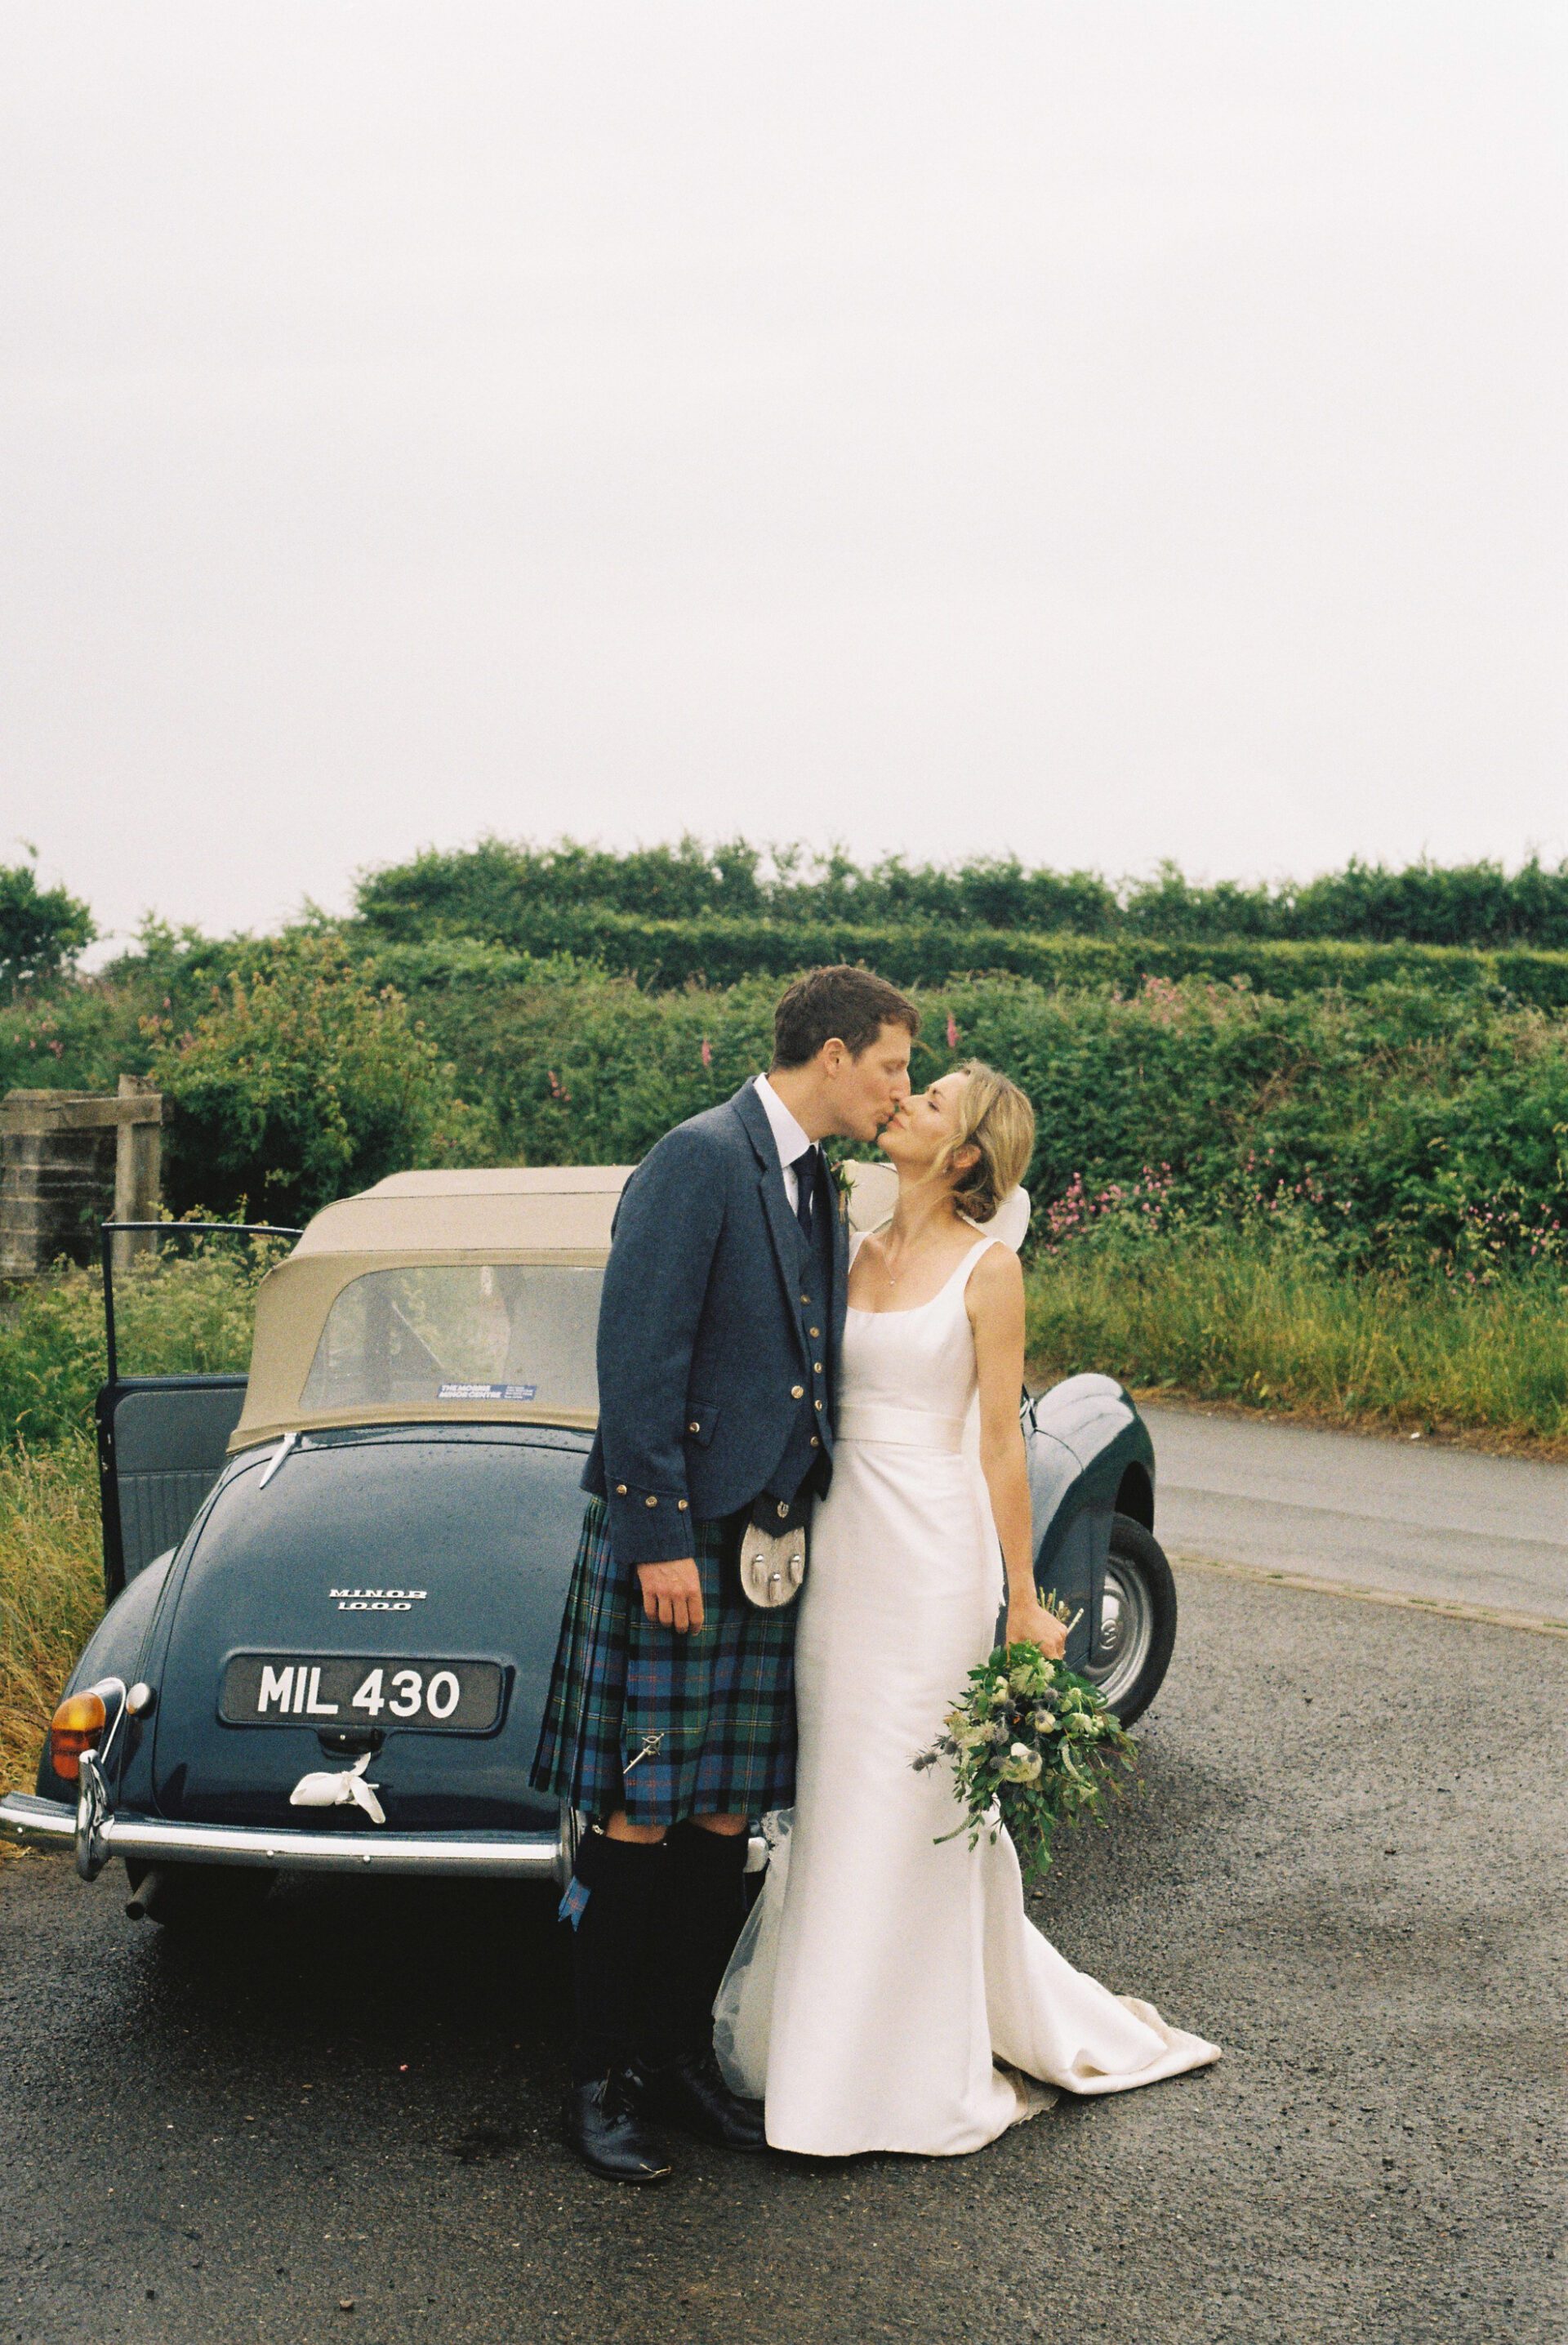 The bride and groom share a kiss in front of their vintage wedding car, captured on 35mm film